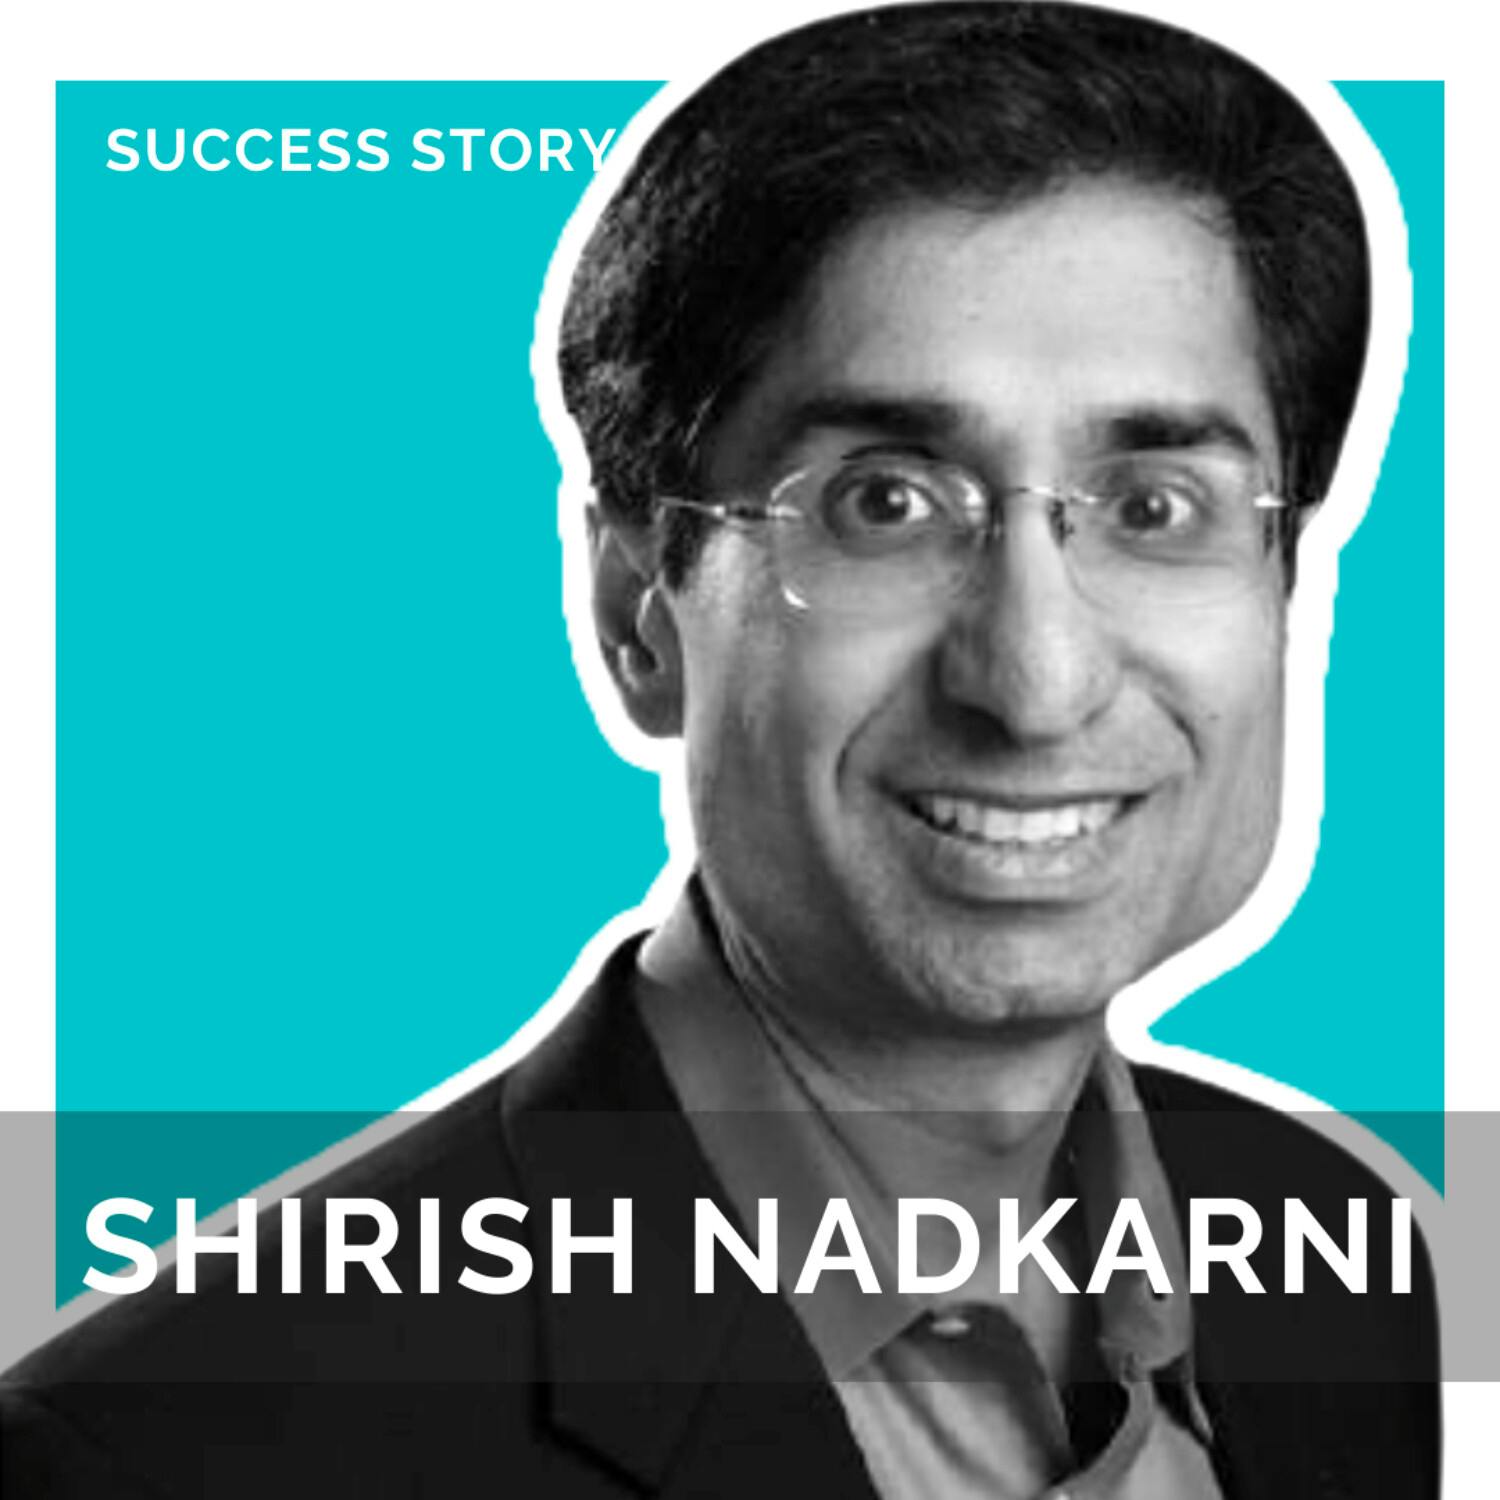 Shirish Nadkarni, Author of From Startup to Exit | An Insider's Guide to Launching and Scaling Your Tech Business